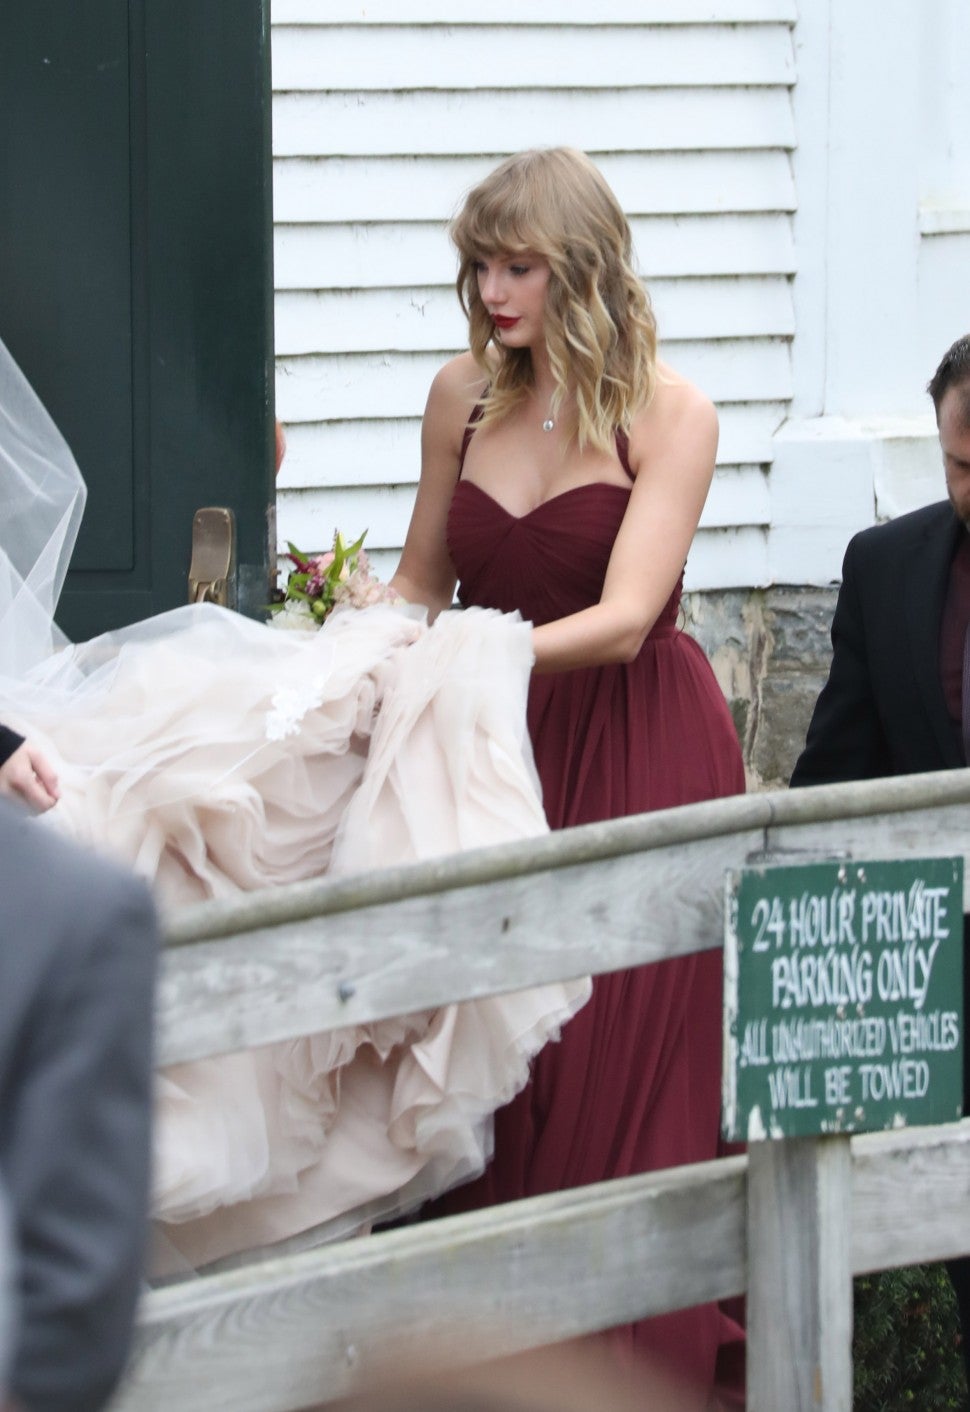 Taylor Swift as a bridesmaid for Abigail Anderson's wedding